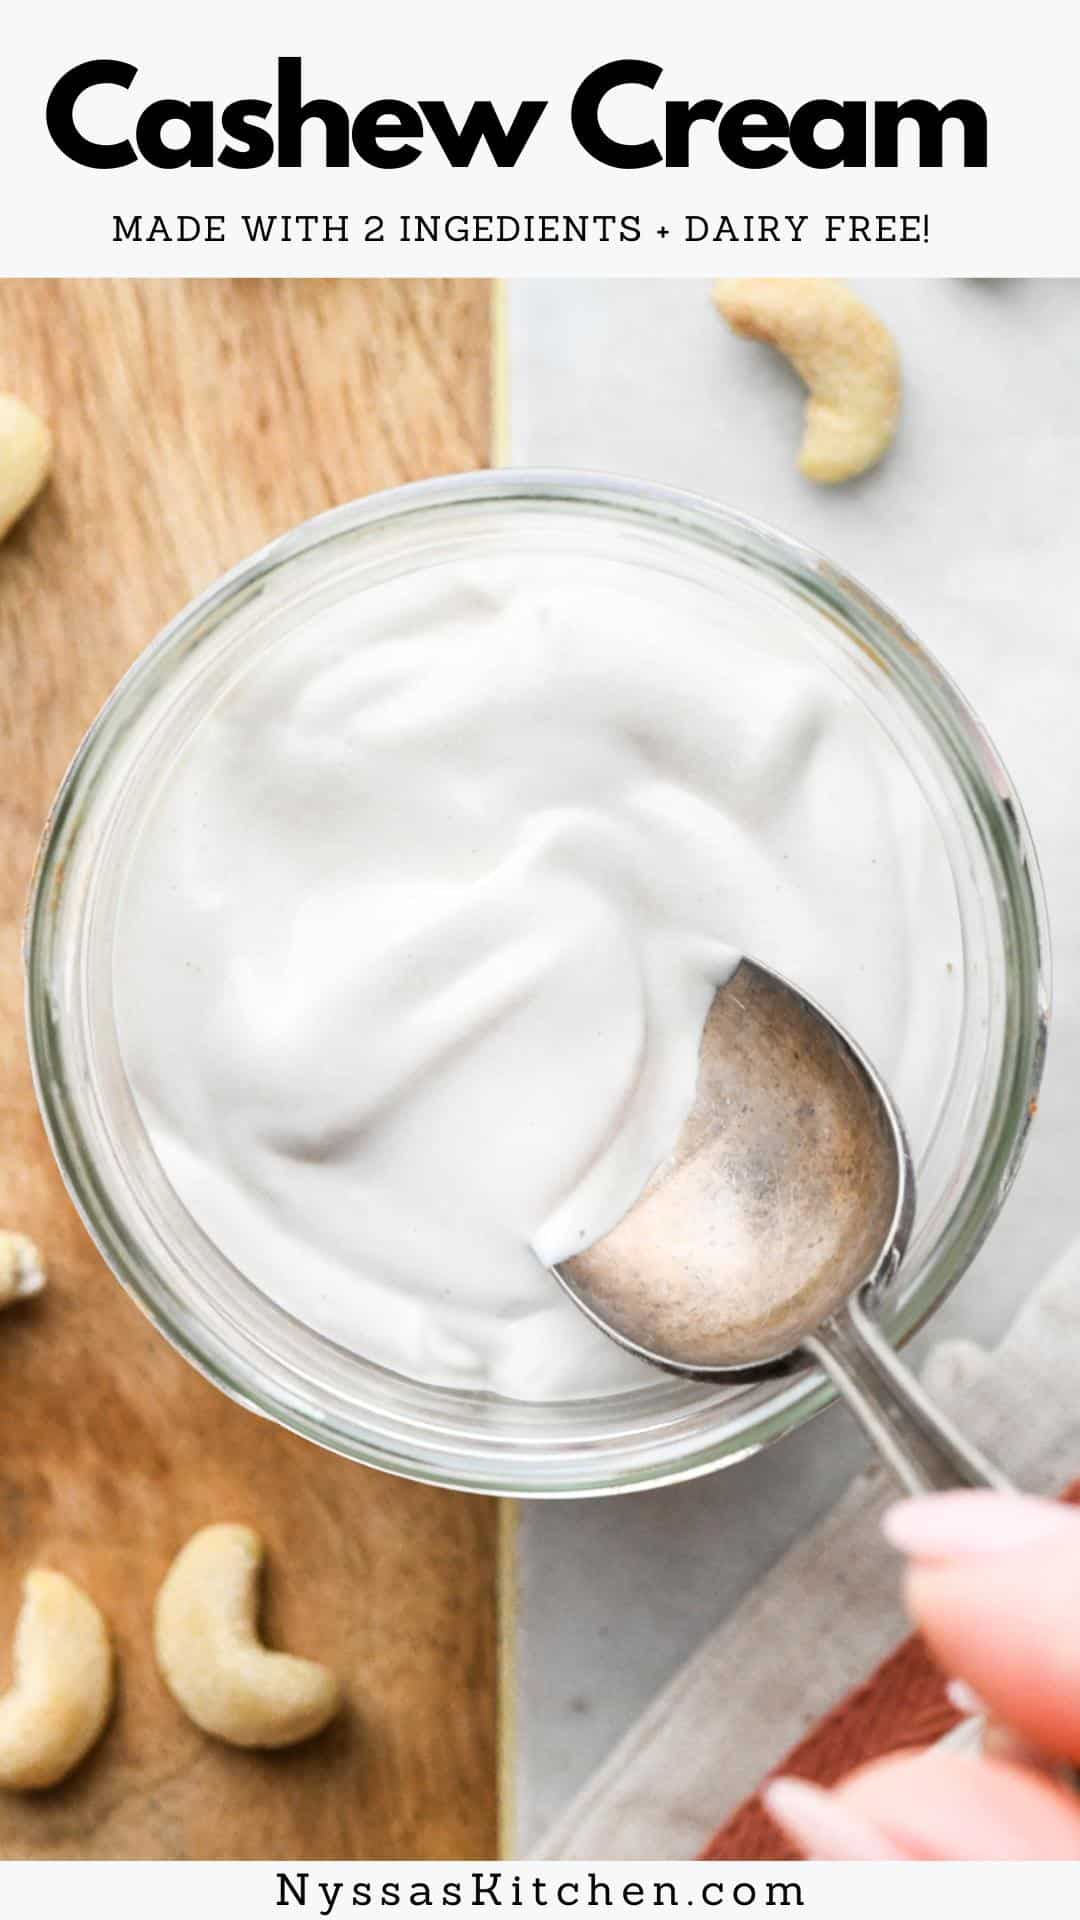 Cashew cream is a luscious dairy free wonder that can be used to replace heavy cream in savory to sweet recipes alike. Made with just water and raw cashews, it's quick and easy to whip up. It will transform the way you look at dairy free / vegan cooking, and make your life easier and more delicious! Vegan, Whole30 compatible, and paleo friendly.